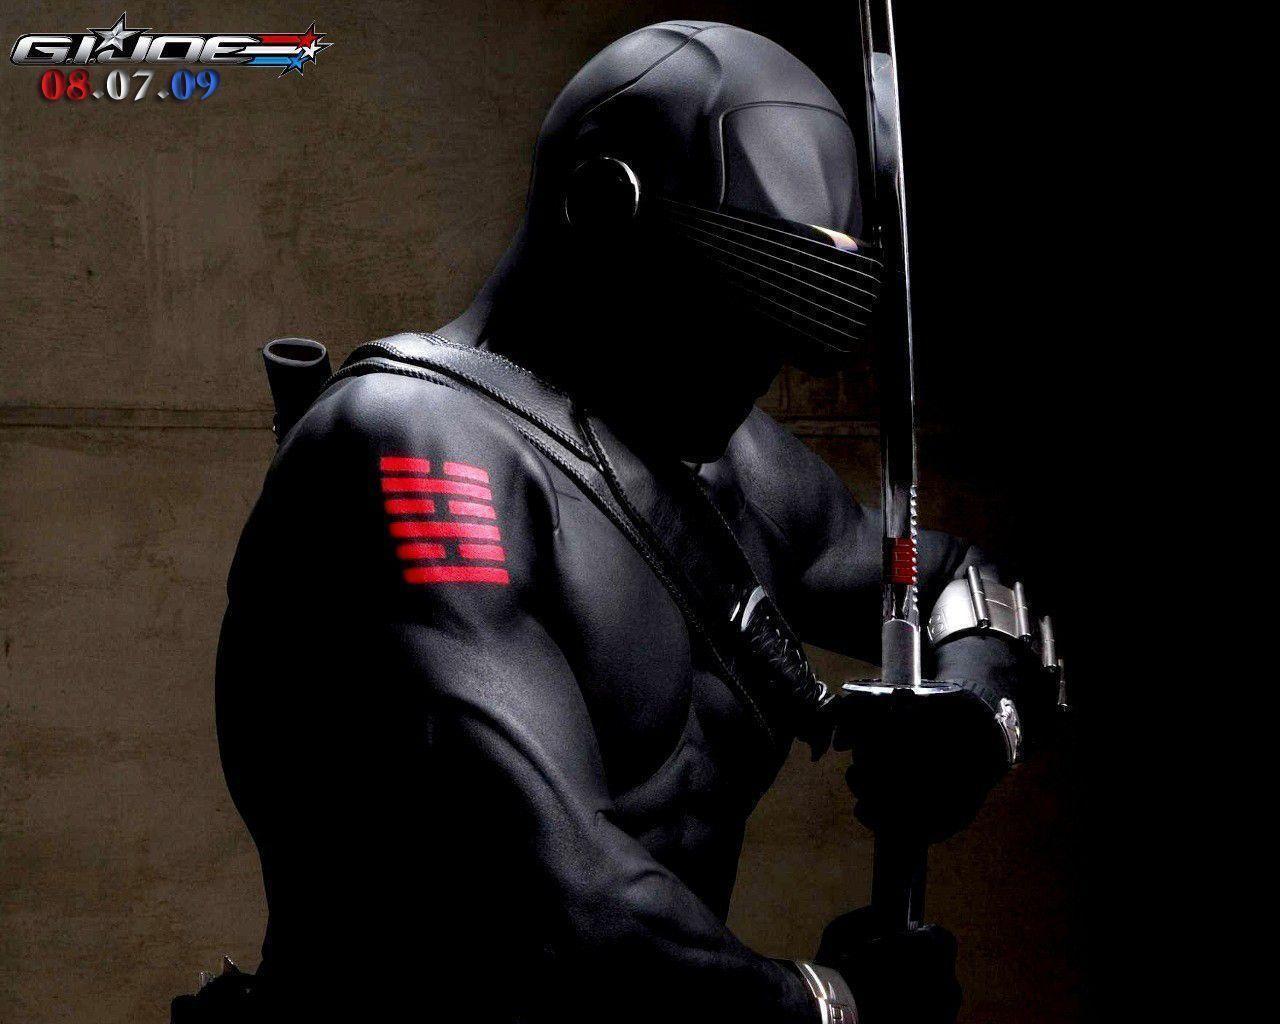 Snake Eyes Gi Joe. Action Figure and Toys, Action Figure and Toys